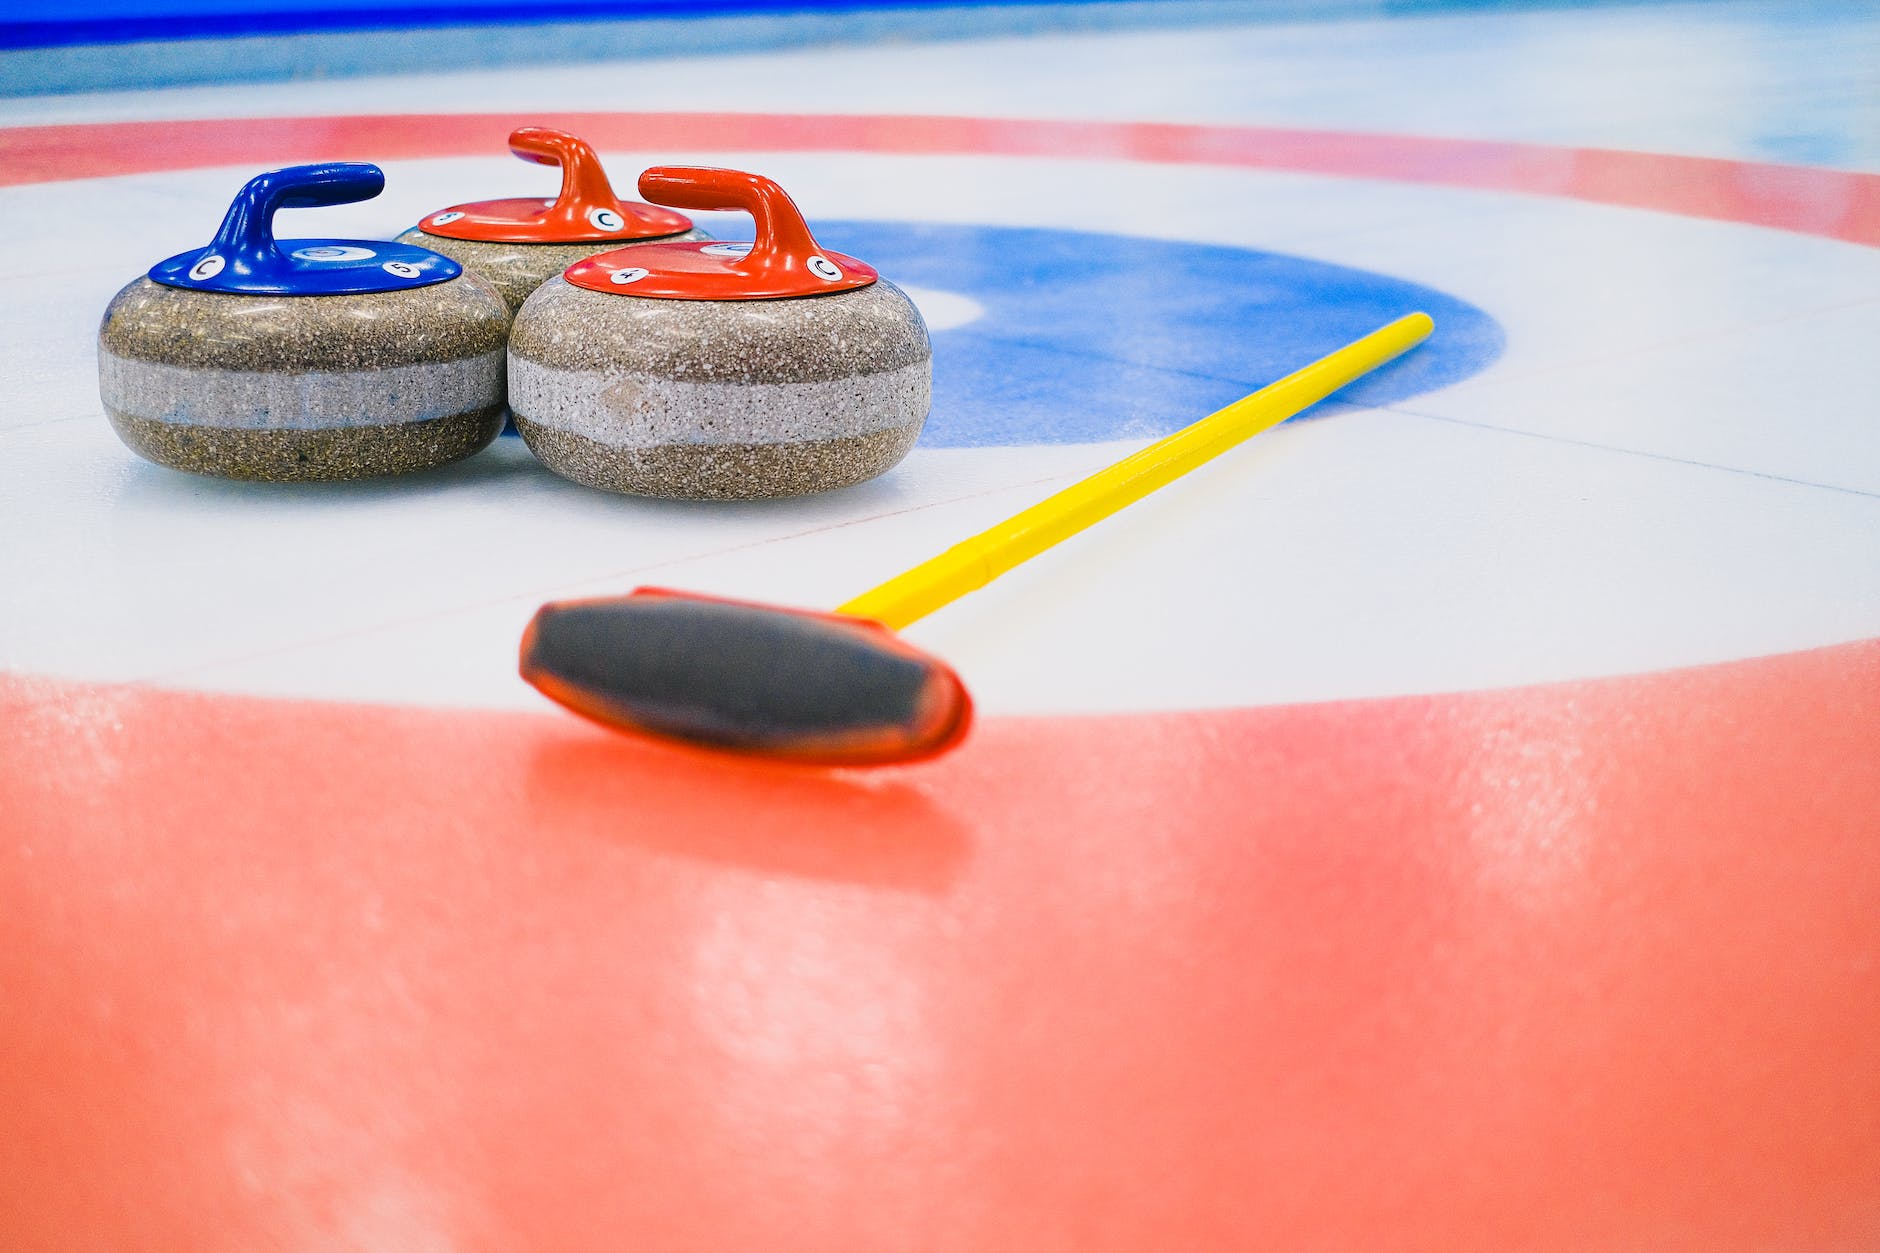 curling equipment on ice sheet (Photo by SHVETS)